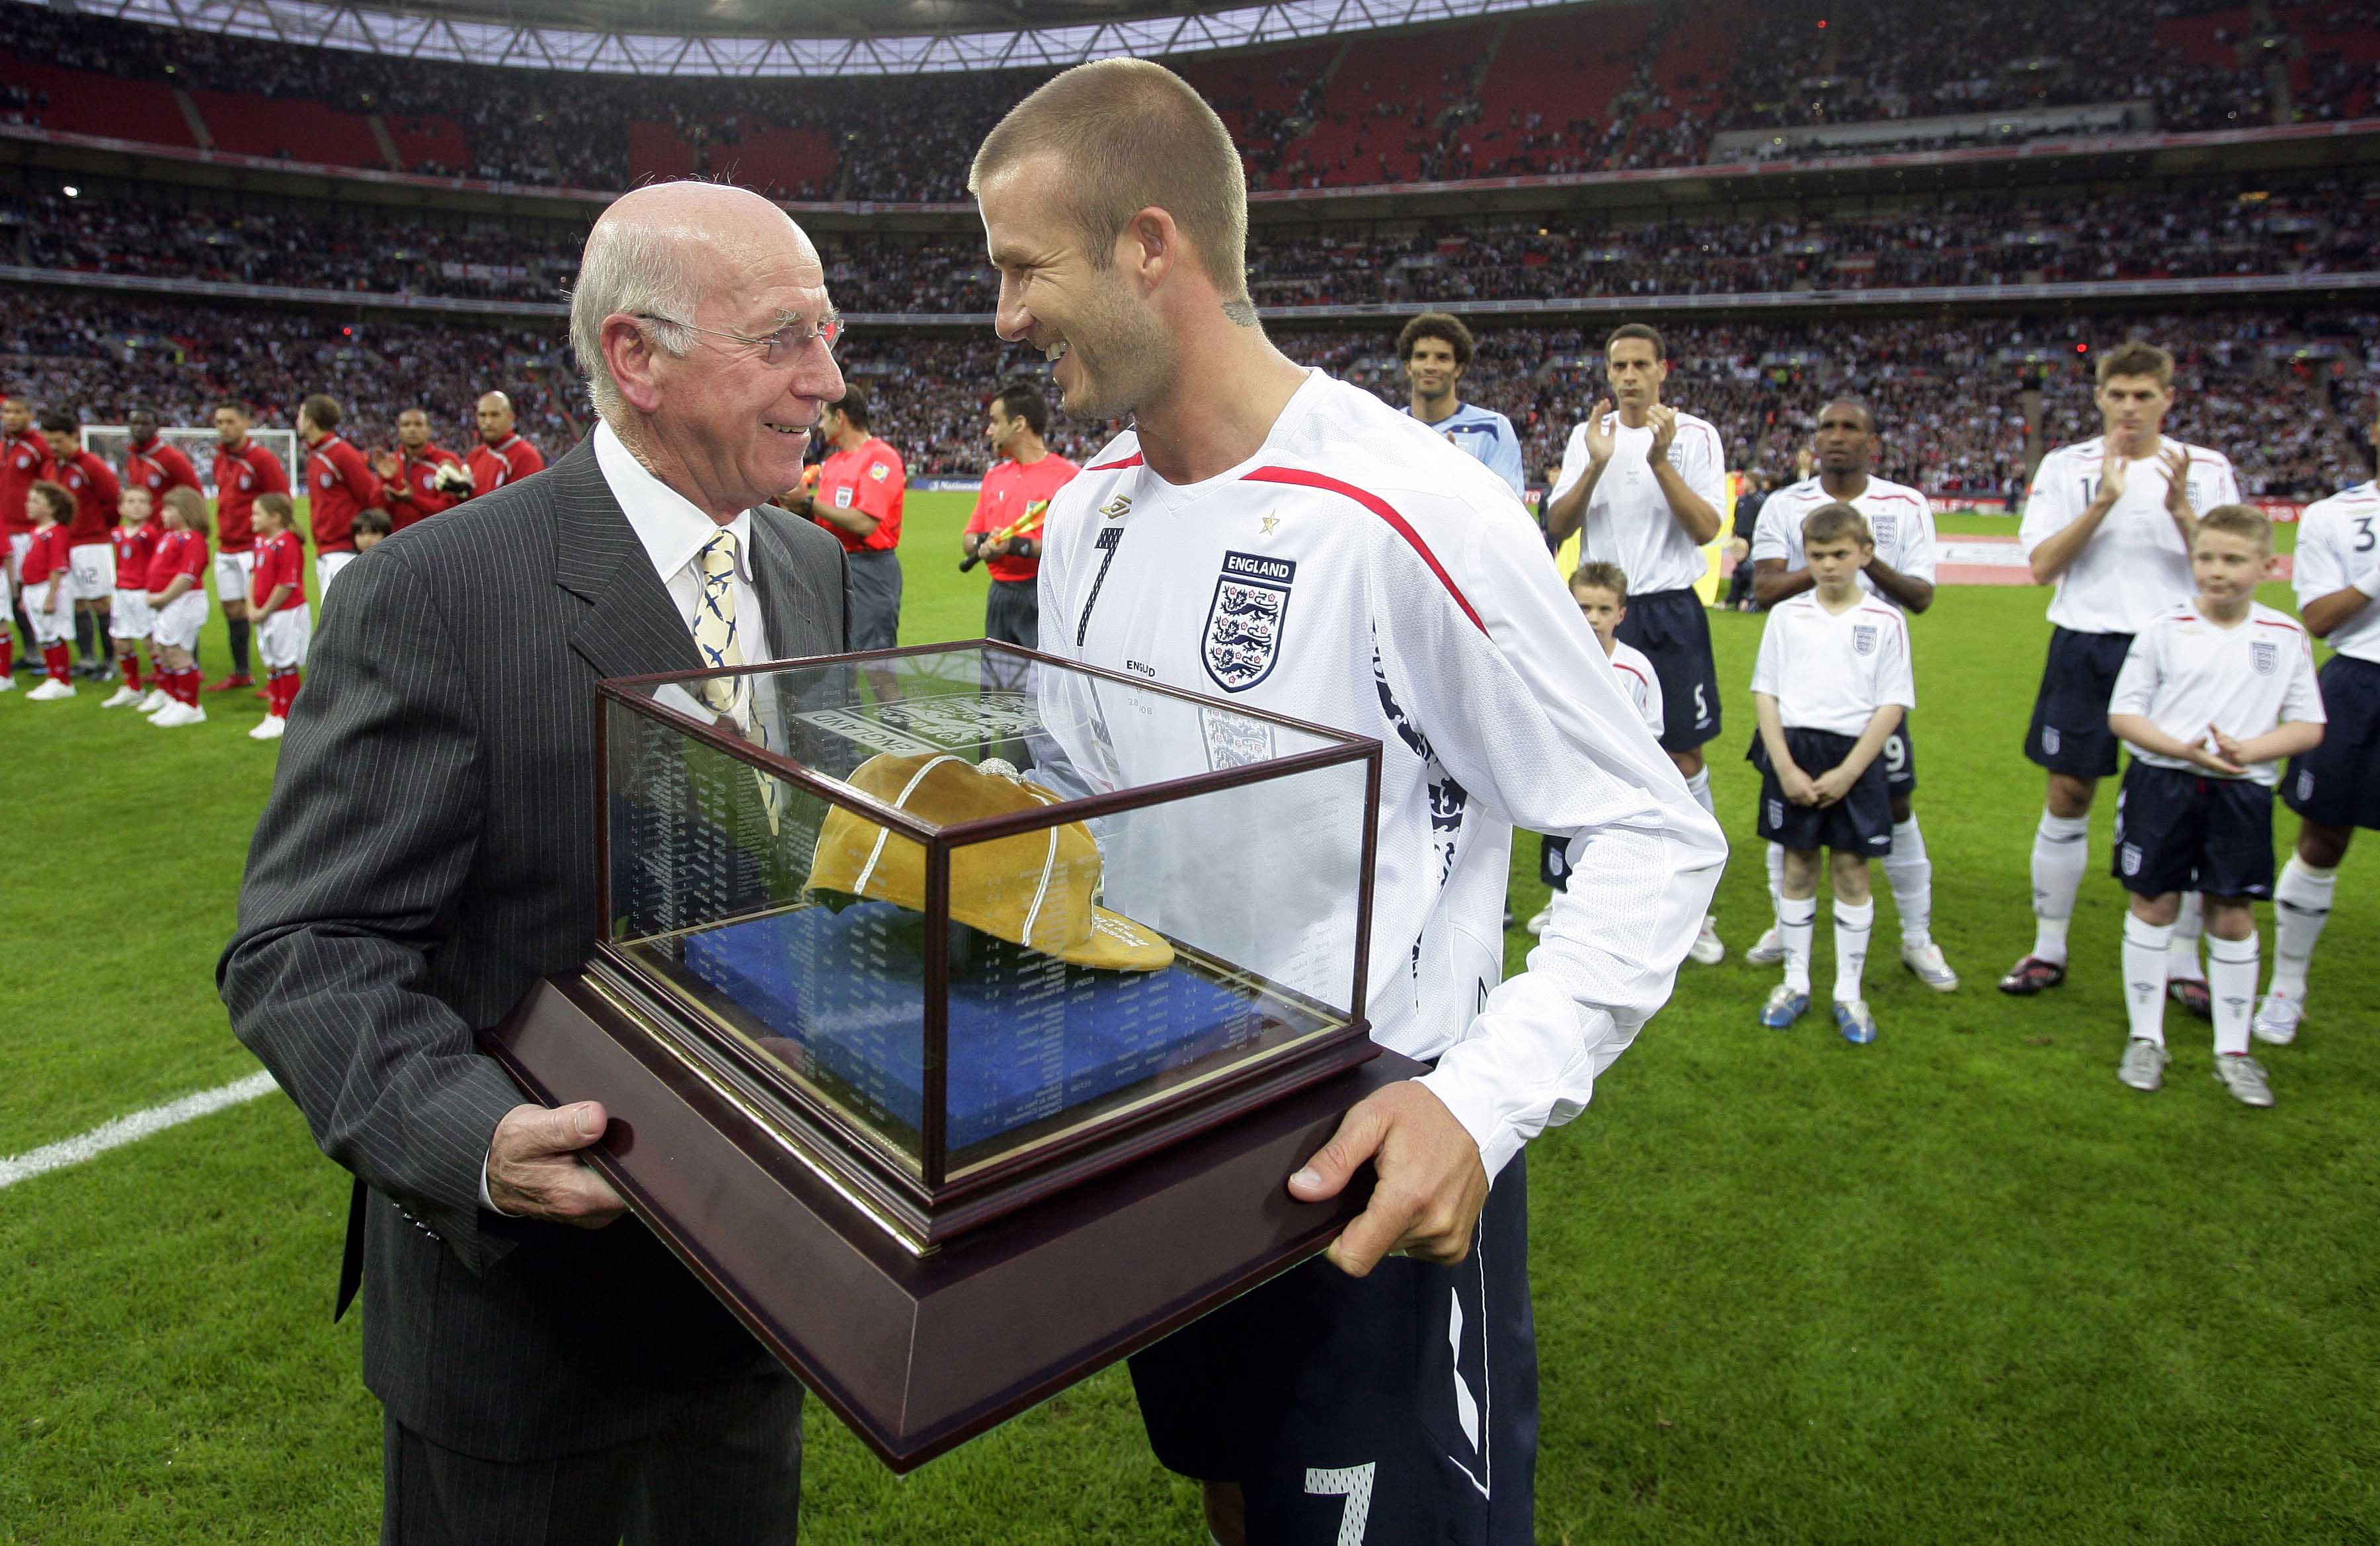 Sir Bobby Charlton is now after a long career the elder statesman of English football